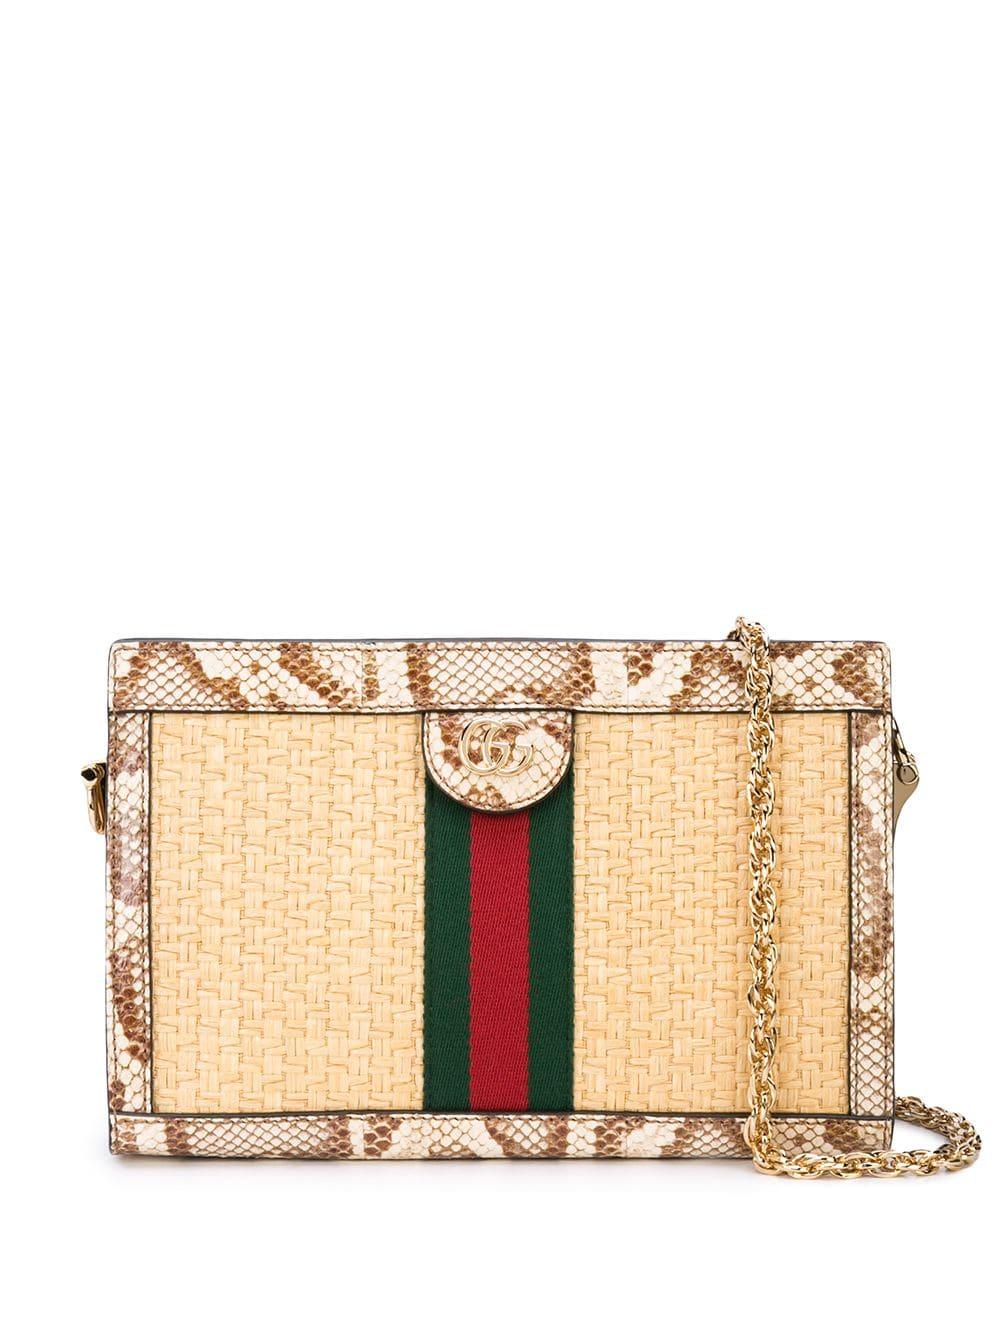 Gucci Ophidia Straw Small Shoulder Bag in Brown | Lyst